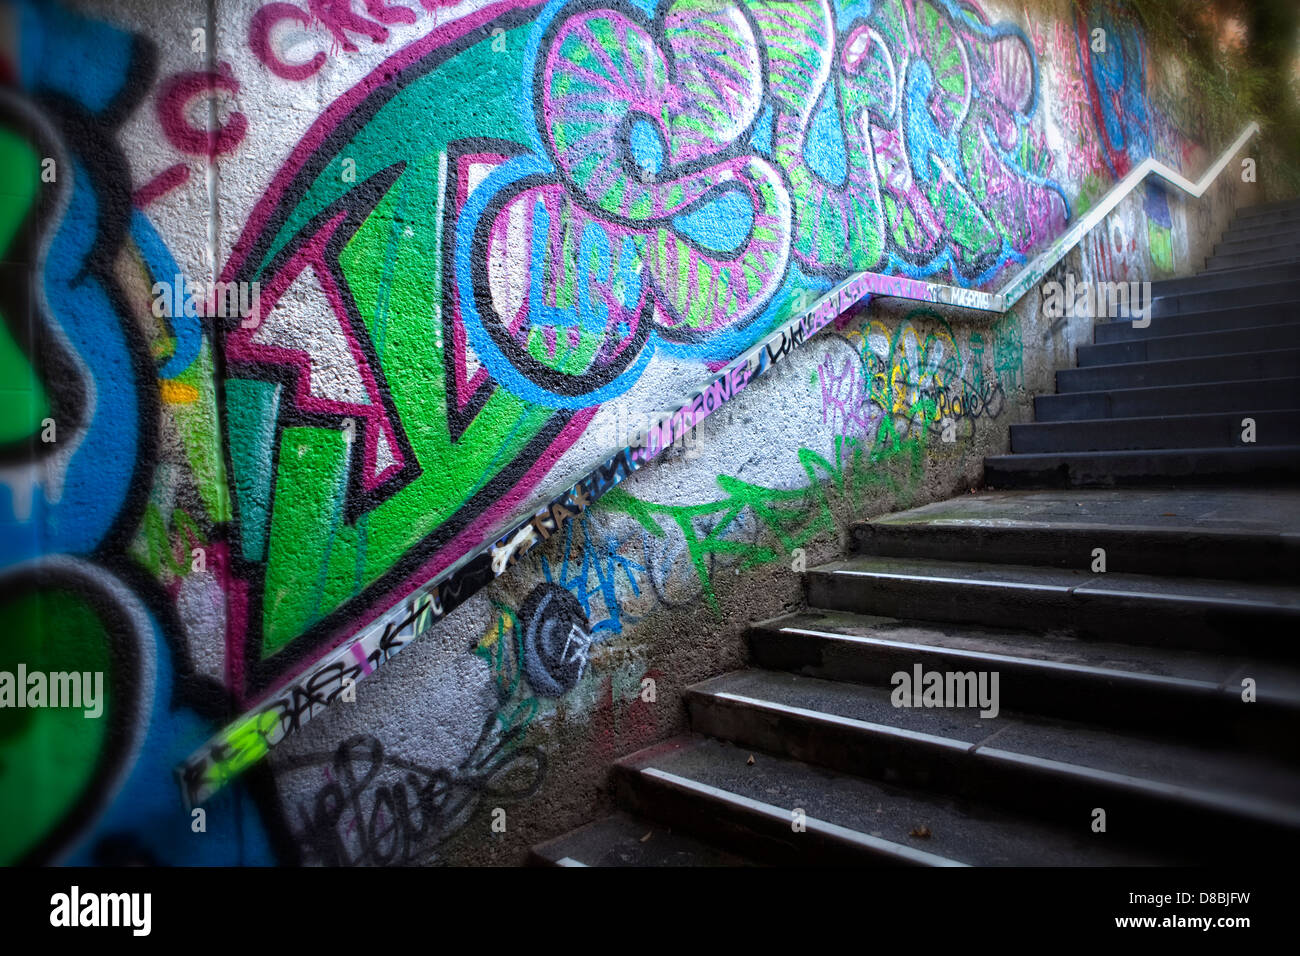 A dark staircase with graffiti, Germany, Europe Stock Photo